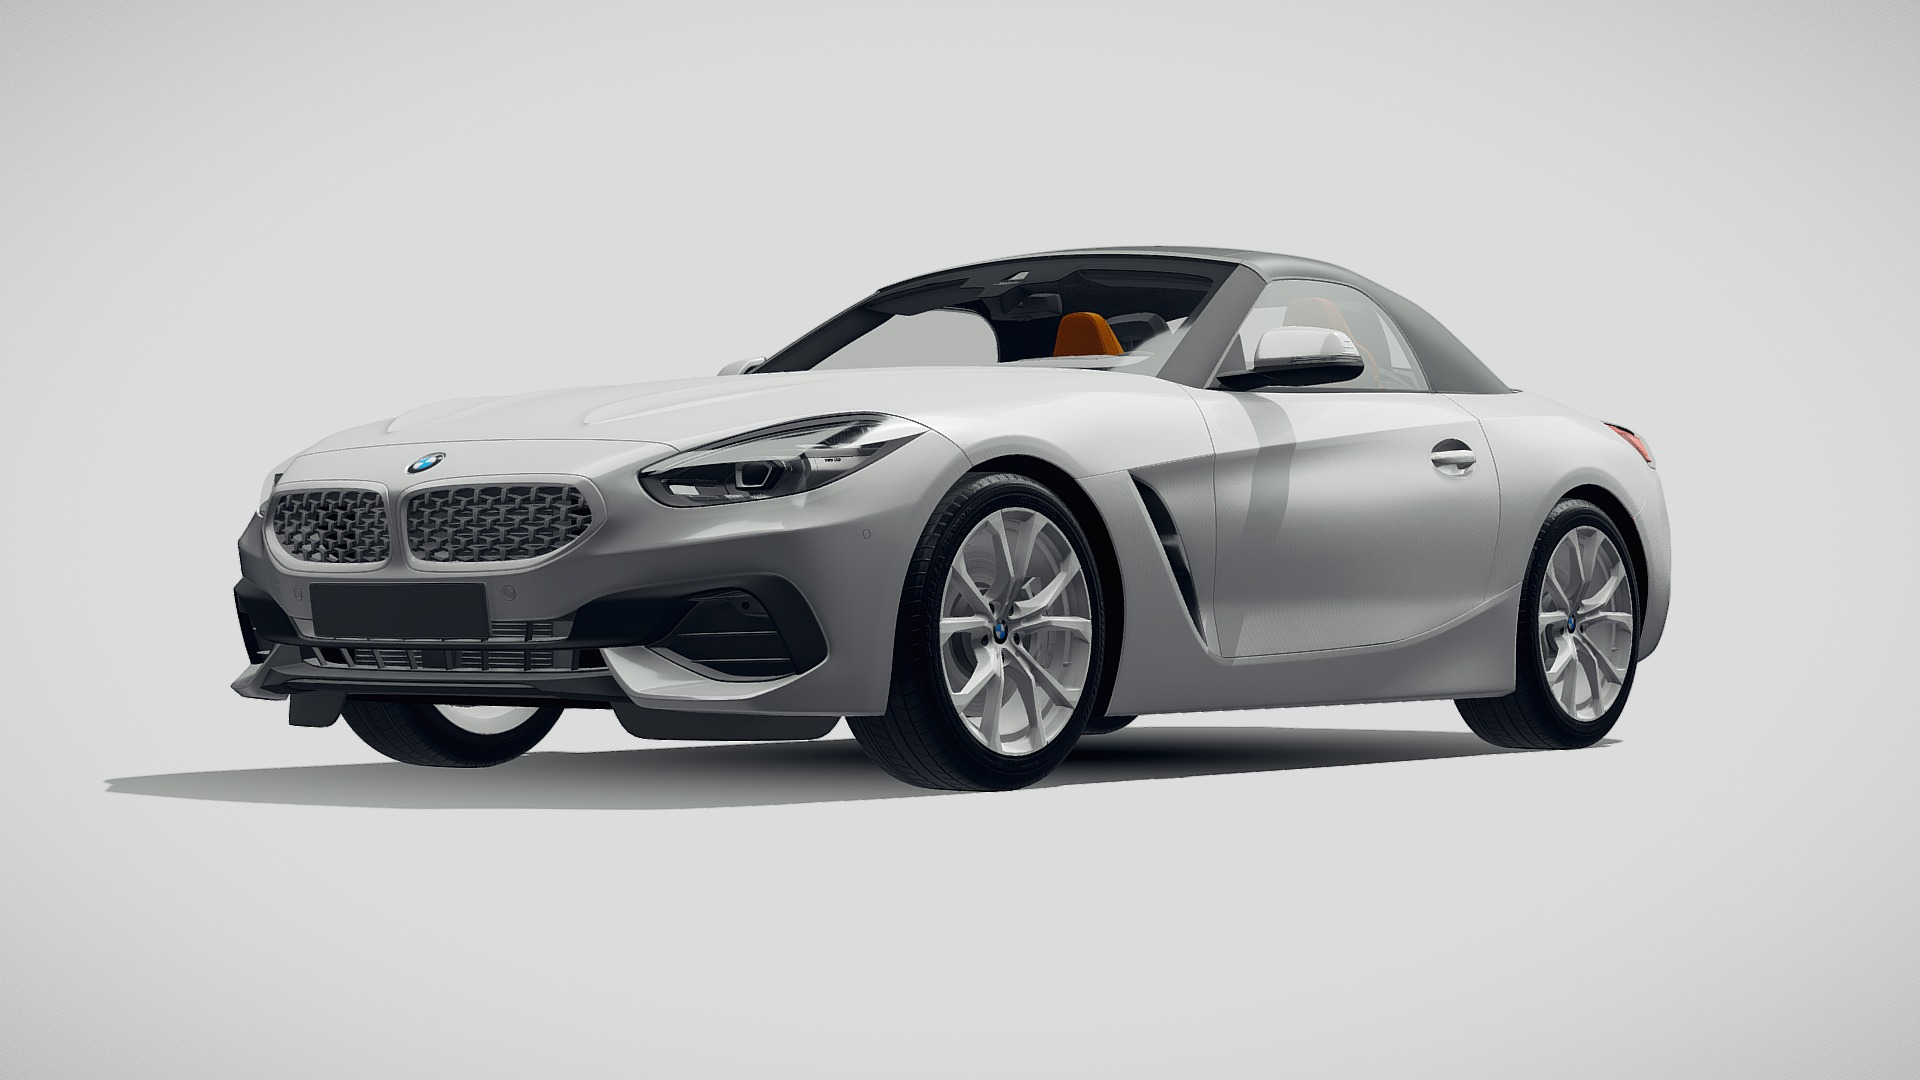 3D model BMW Z4 2019 - This is a 3D model of the BMW Z4 2019. The 3D model is about a silver sports car.